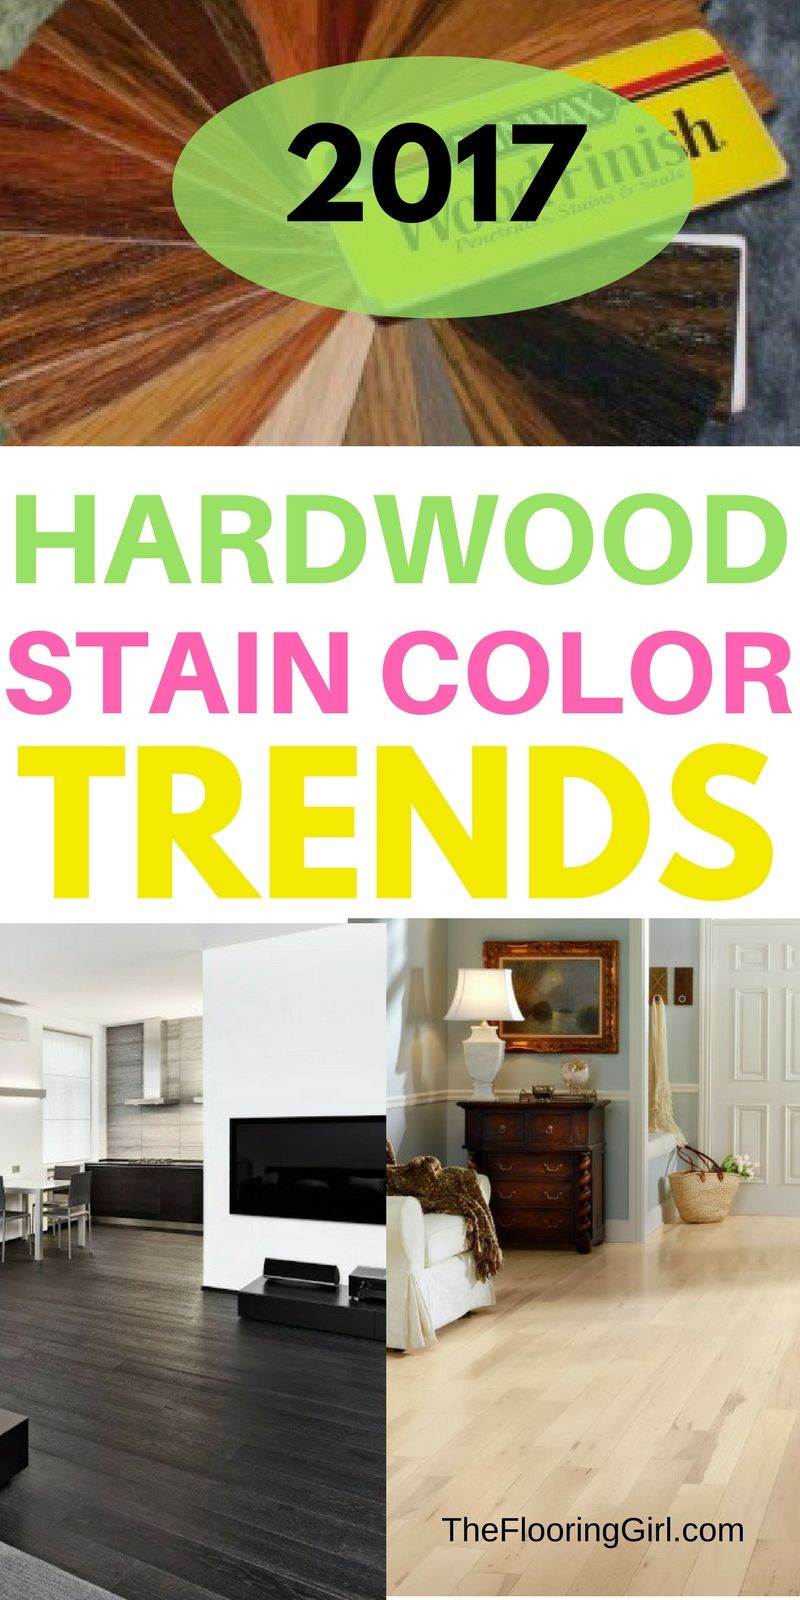 20 Trendy Can You Use Different Color Hardwood Floors 2024 free download can you use different color hardwood floors of hardwood flooring stain color trends 2018 more from the flooring pertaining to hardwood flooring stain color trends for 2017 hardwood colors th